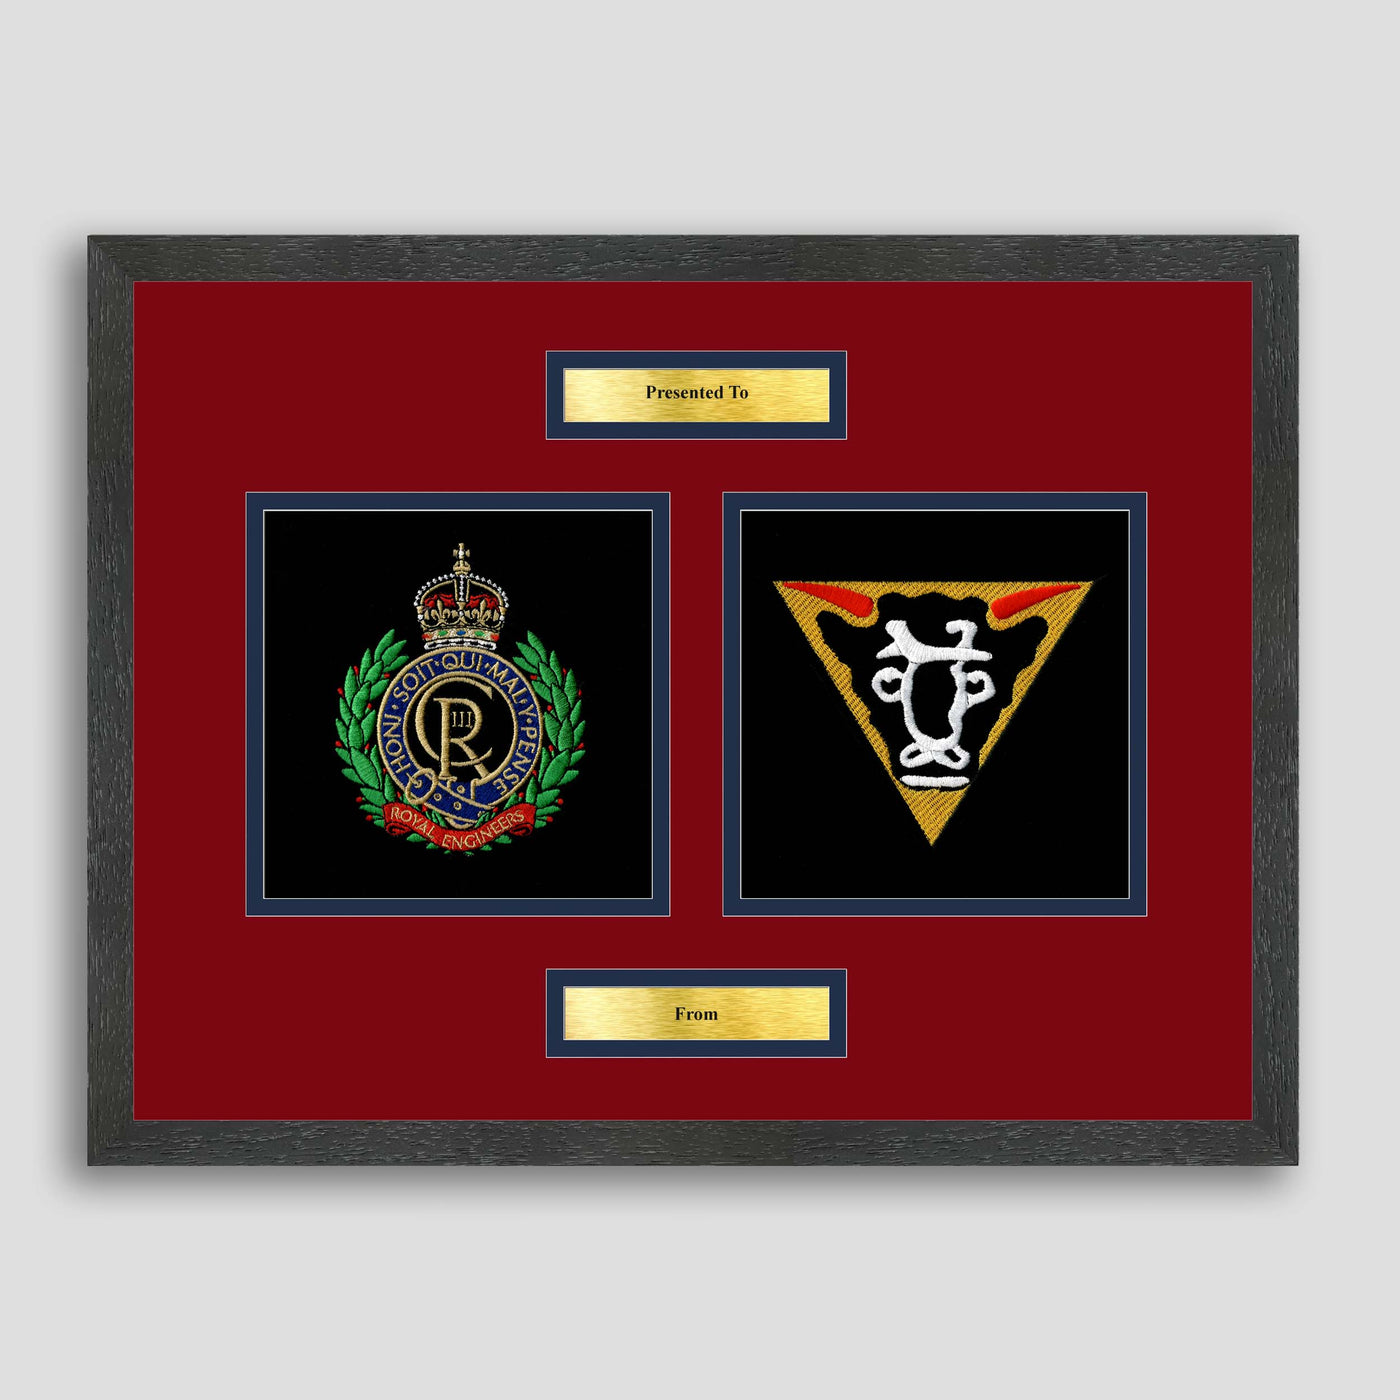 32 Engineers & Royal Engineers Crest Framed Military Embroidery Presentation